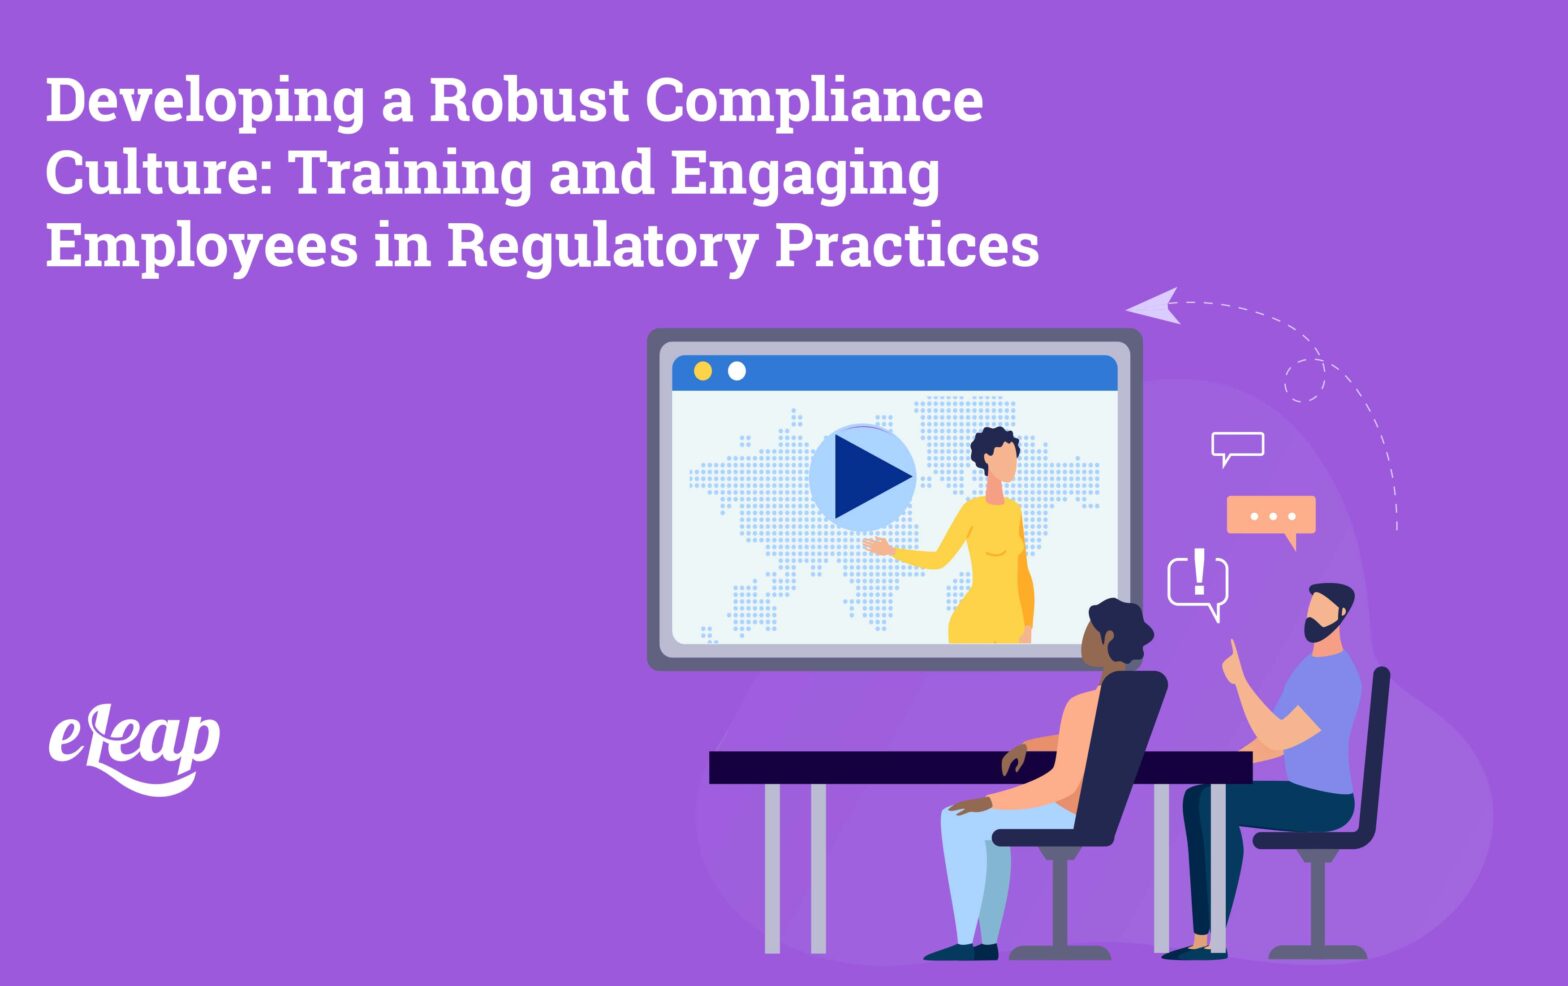 Developing a Robust Compliance Culture: Training and Engaging Employees in Regulatory Practices